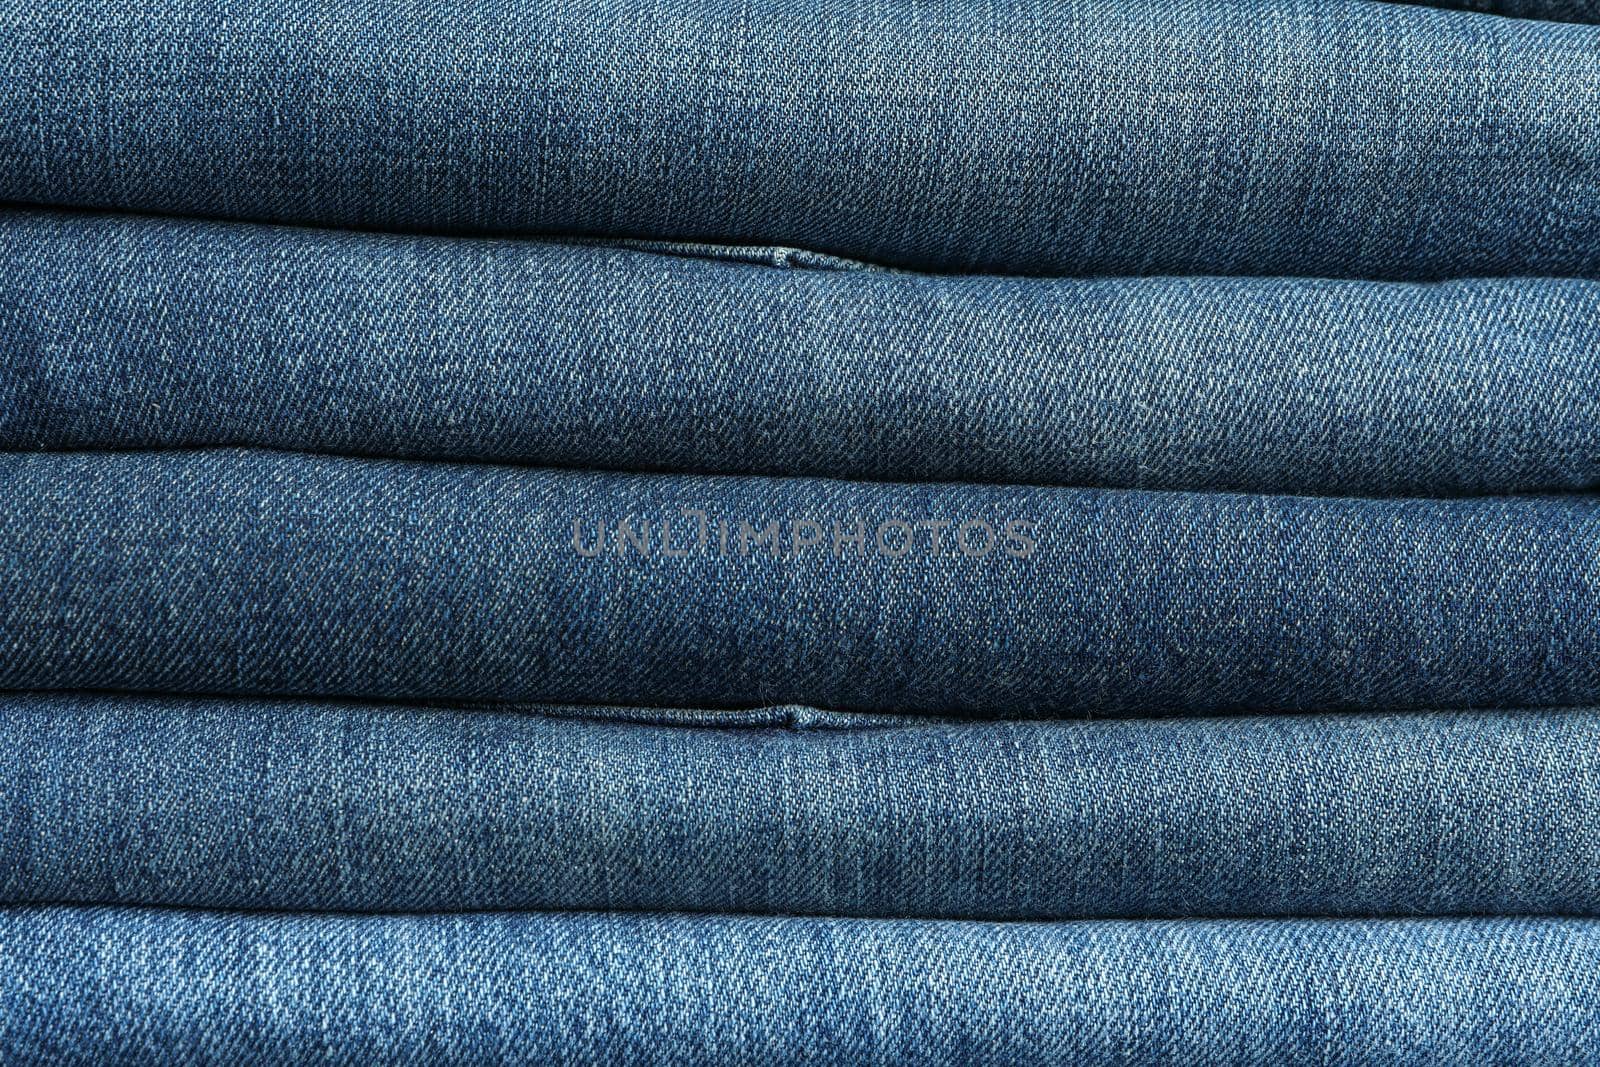 Stack of jeans pants textured background, close up by AtlasCompany